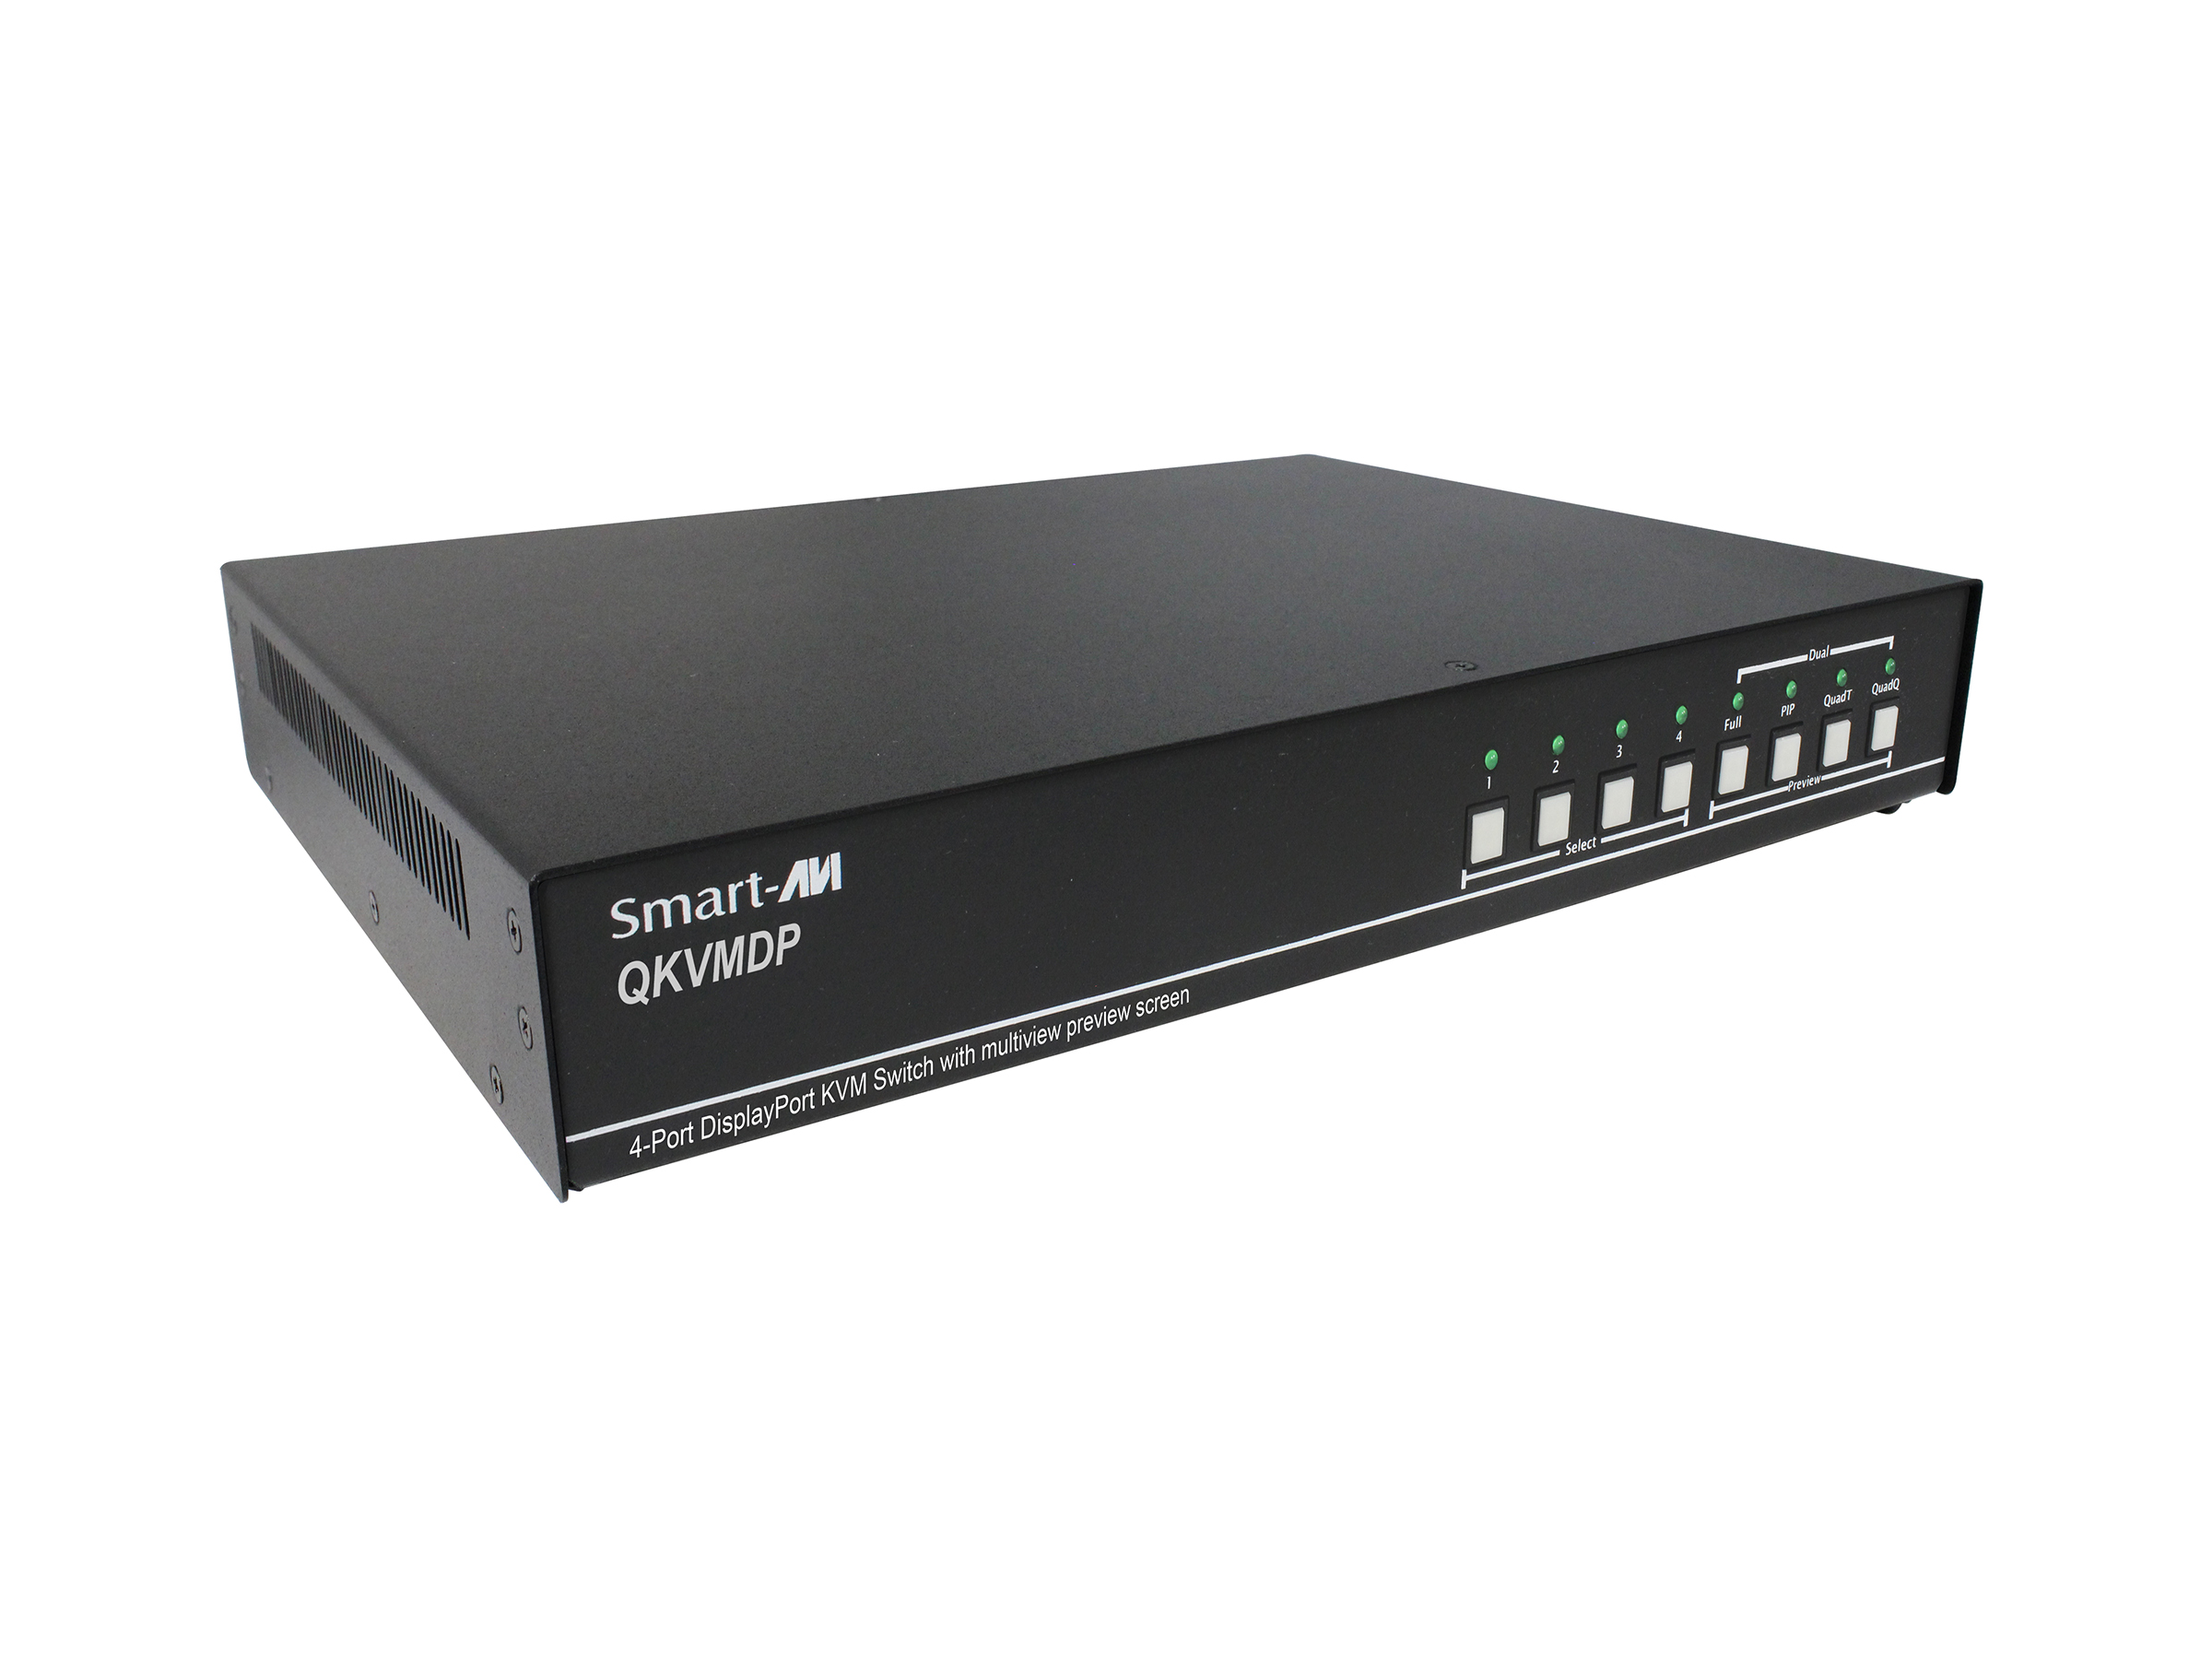 SM-QKVMDP-S 4-Port DP/USB 2.0 KVM Switch with Multiview Preview Screen and Audio Support by Smartavi